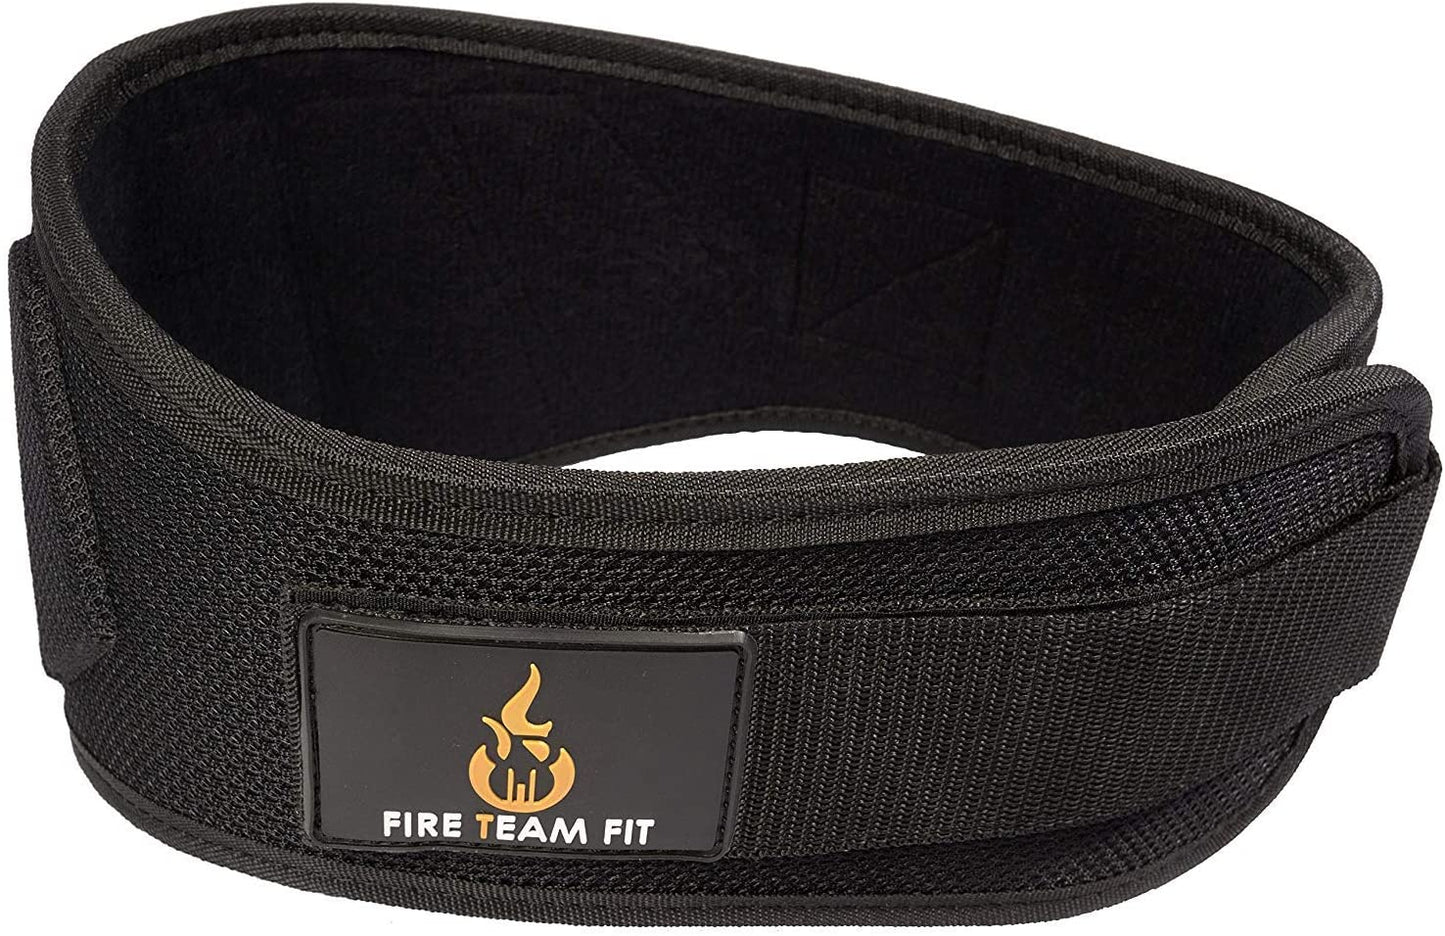 Fire Team Fit Weight Lifting Belt for Men and Women, 6 Inch, Bodybuilding & Fitness Back Support for Cross Training Workout, Squats, Lunges - (For 6 piece(s))